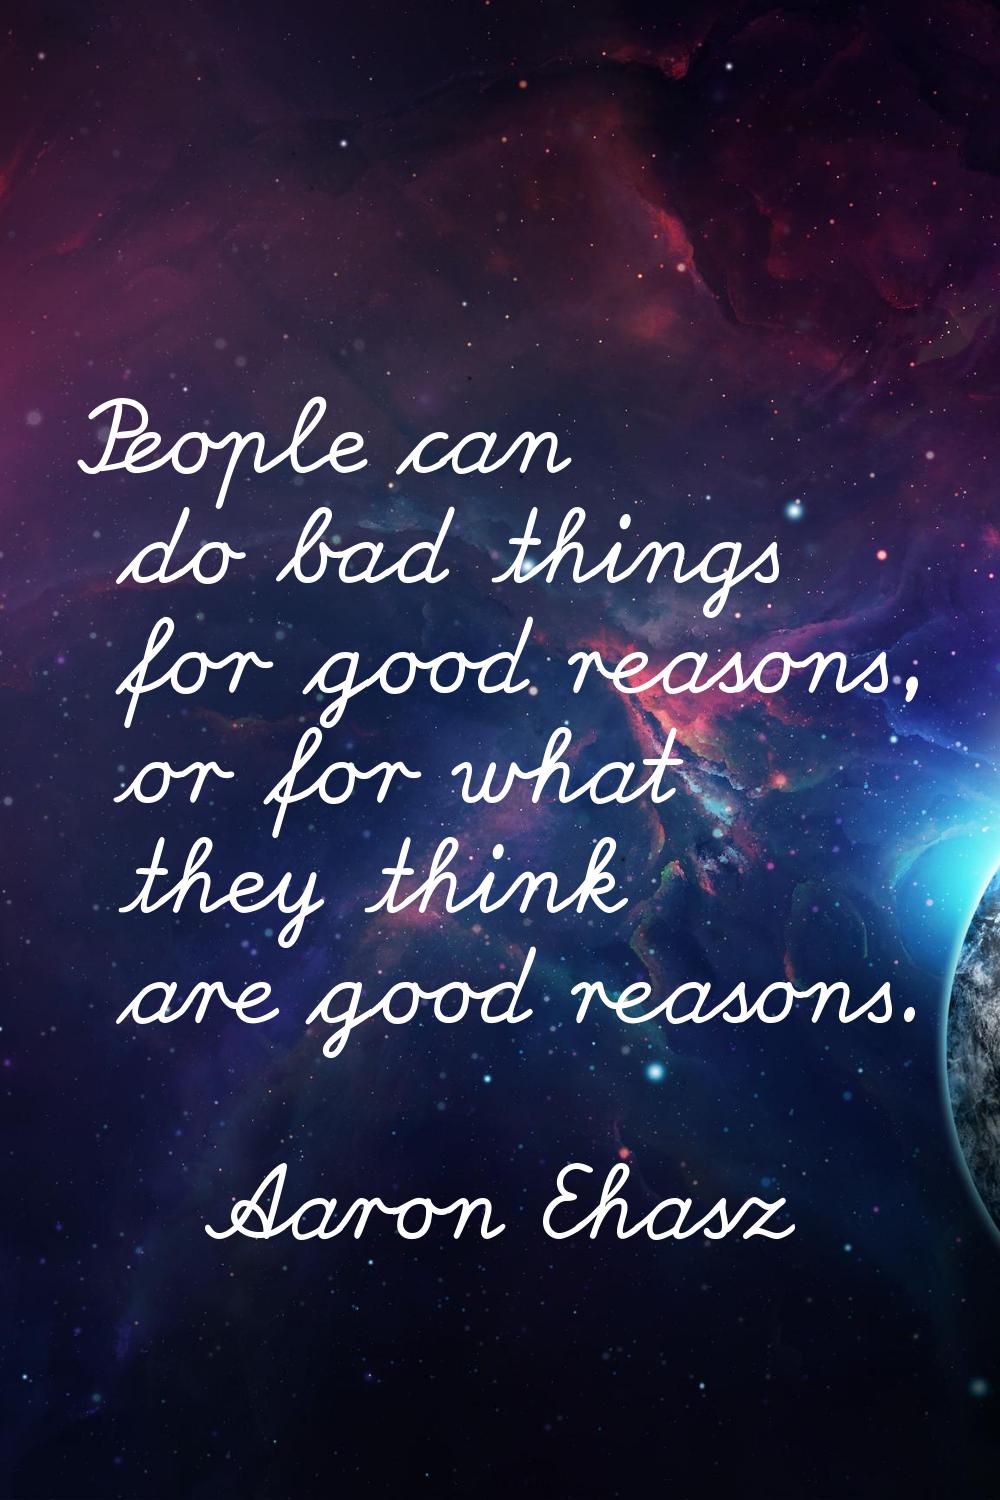 People can do bad things for good reasons, or for what they think are good reasons.